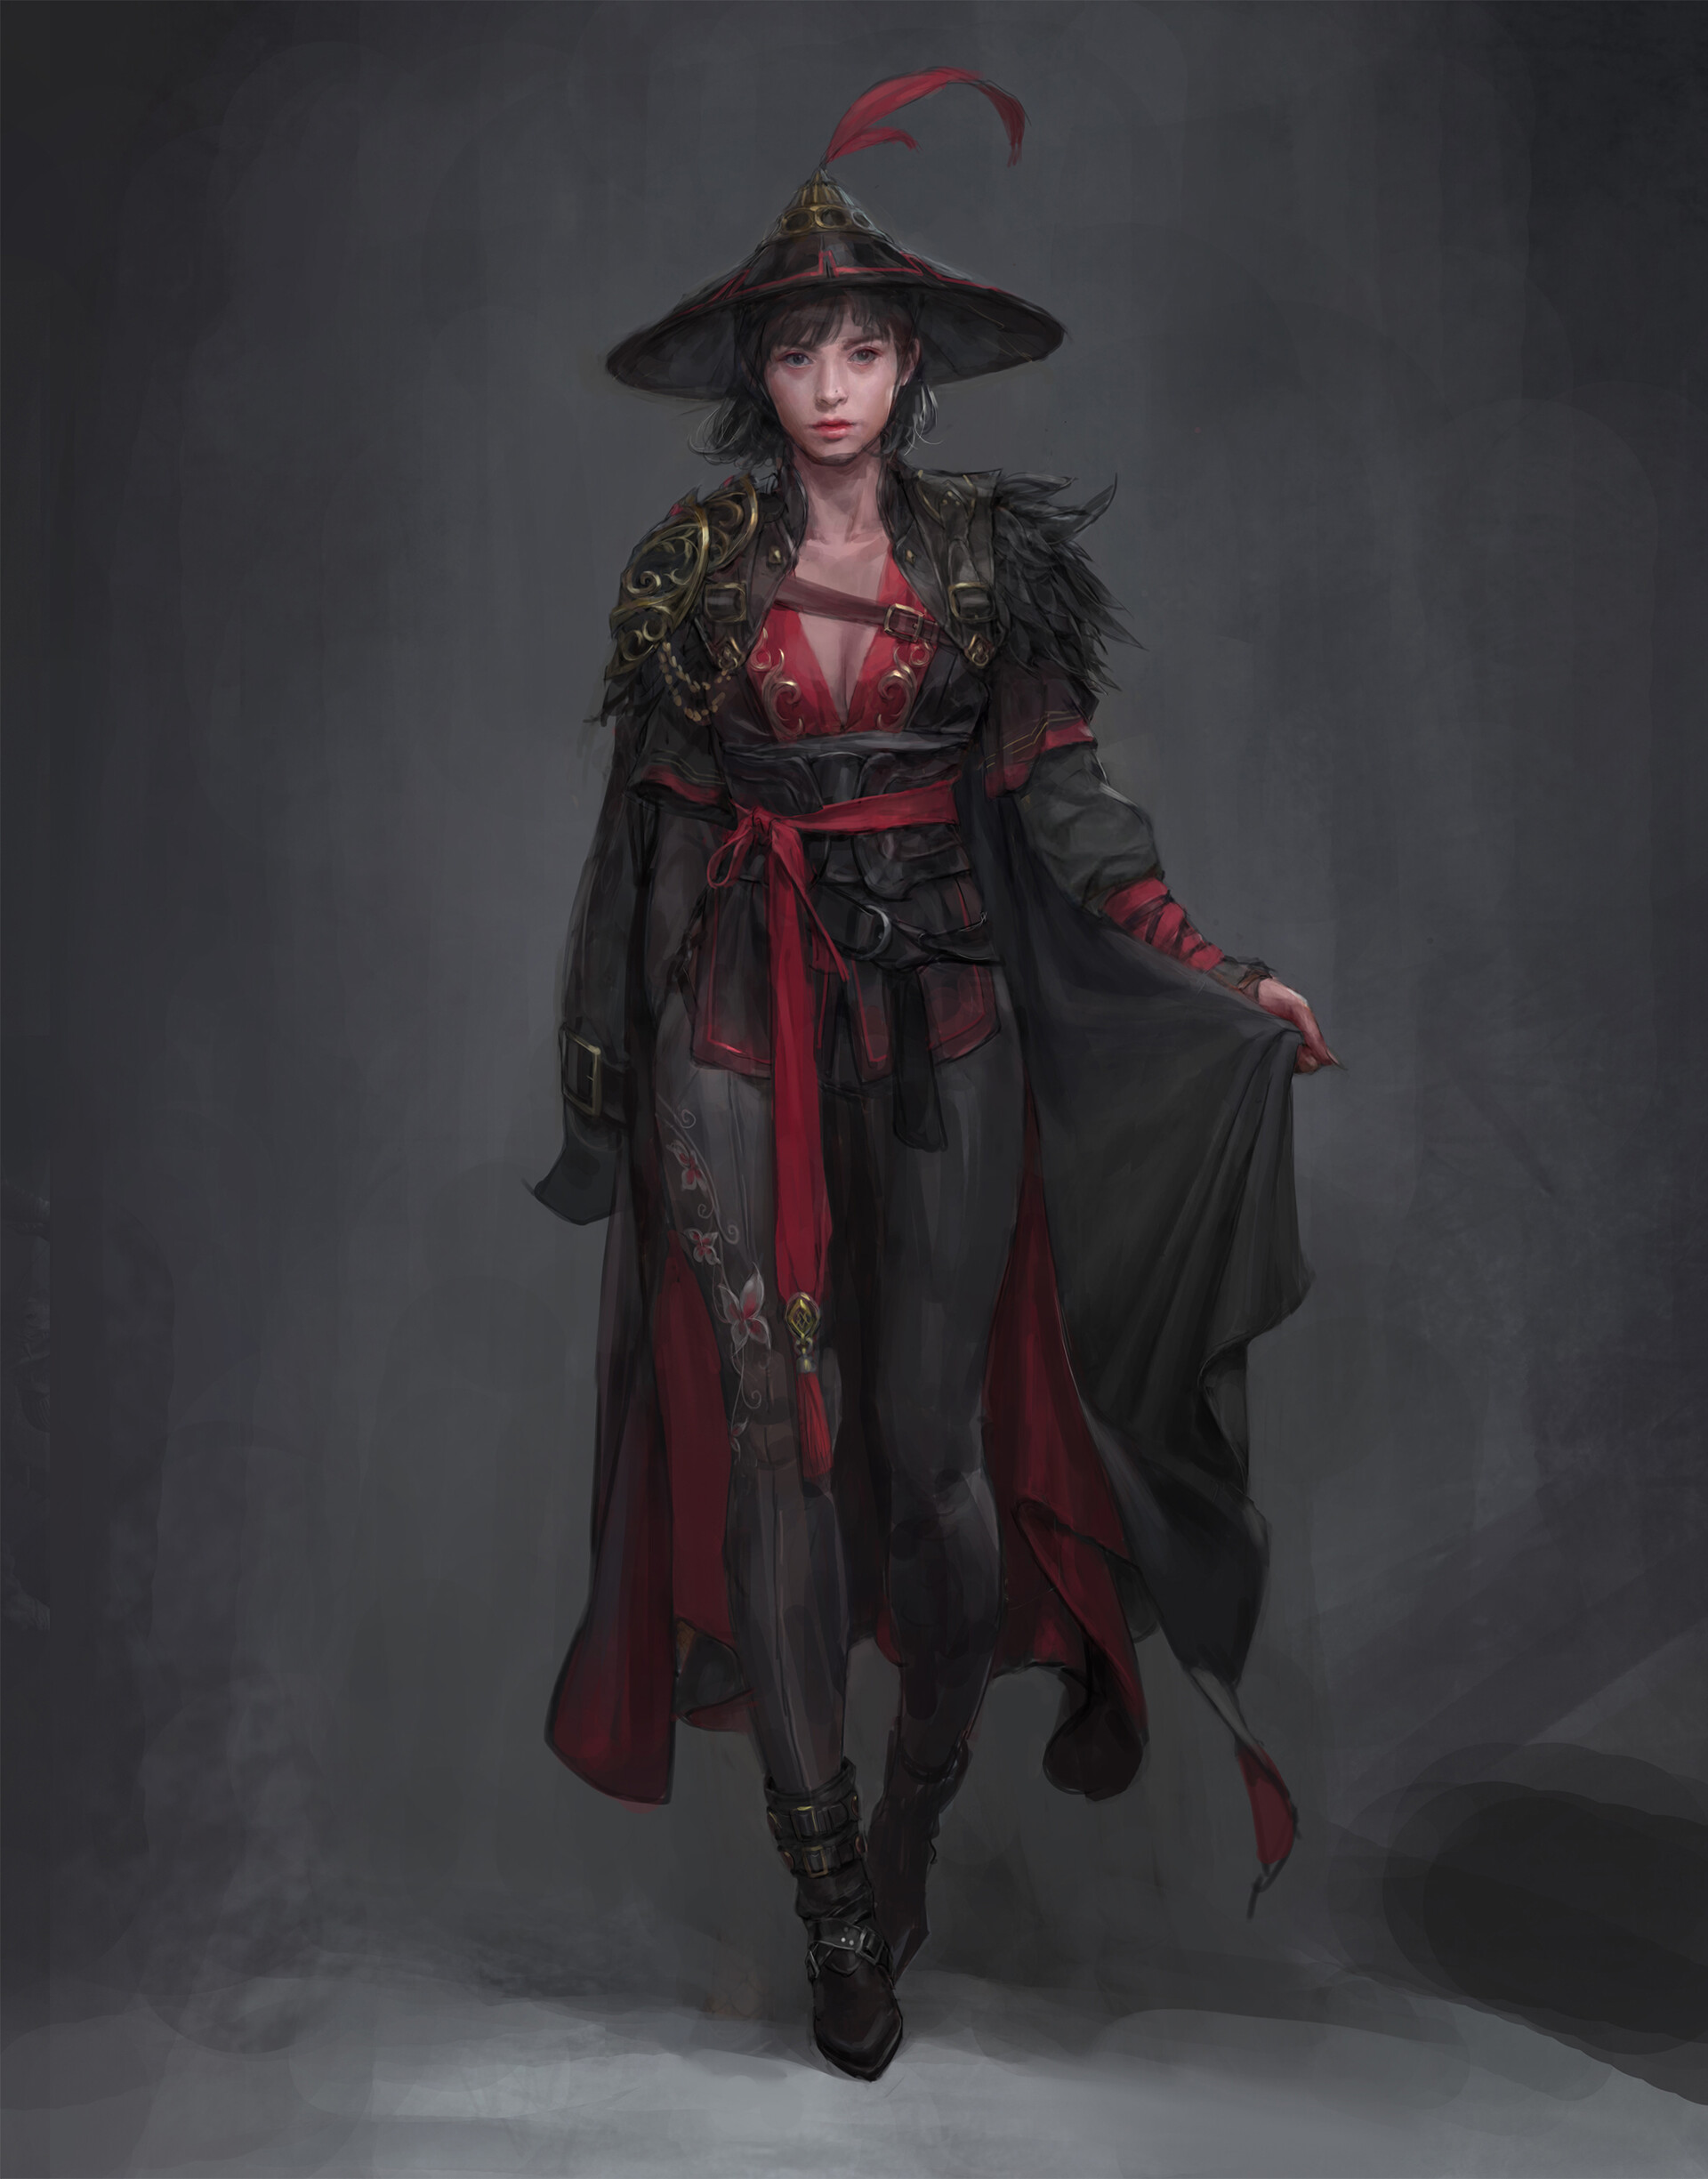 General 1920x2449 Kim Ssang drawing women hat Feudal Japan holding clothes black clothing walking gray simple background portrait display digital art